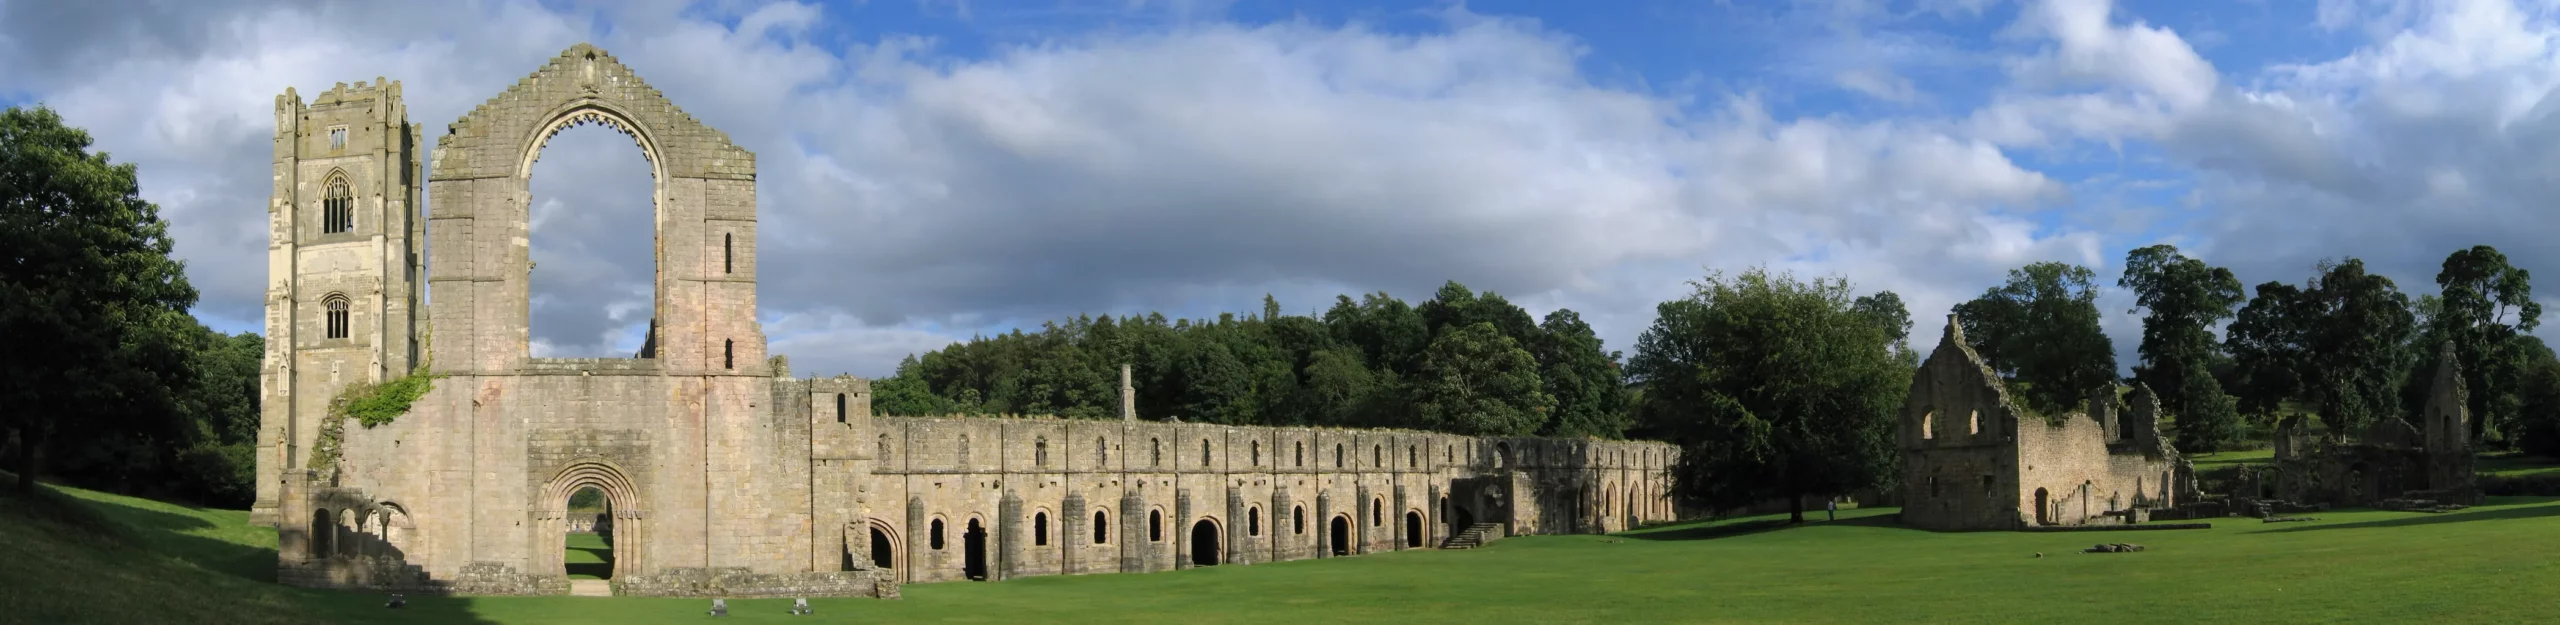 Fountains Abbey Yorkshire 8